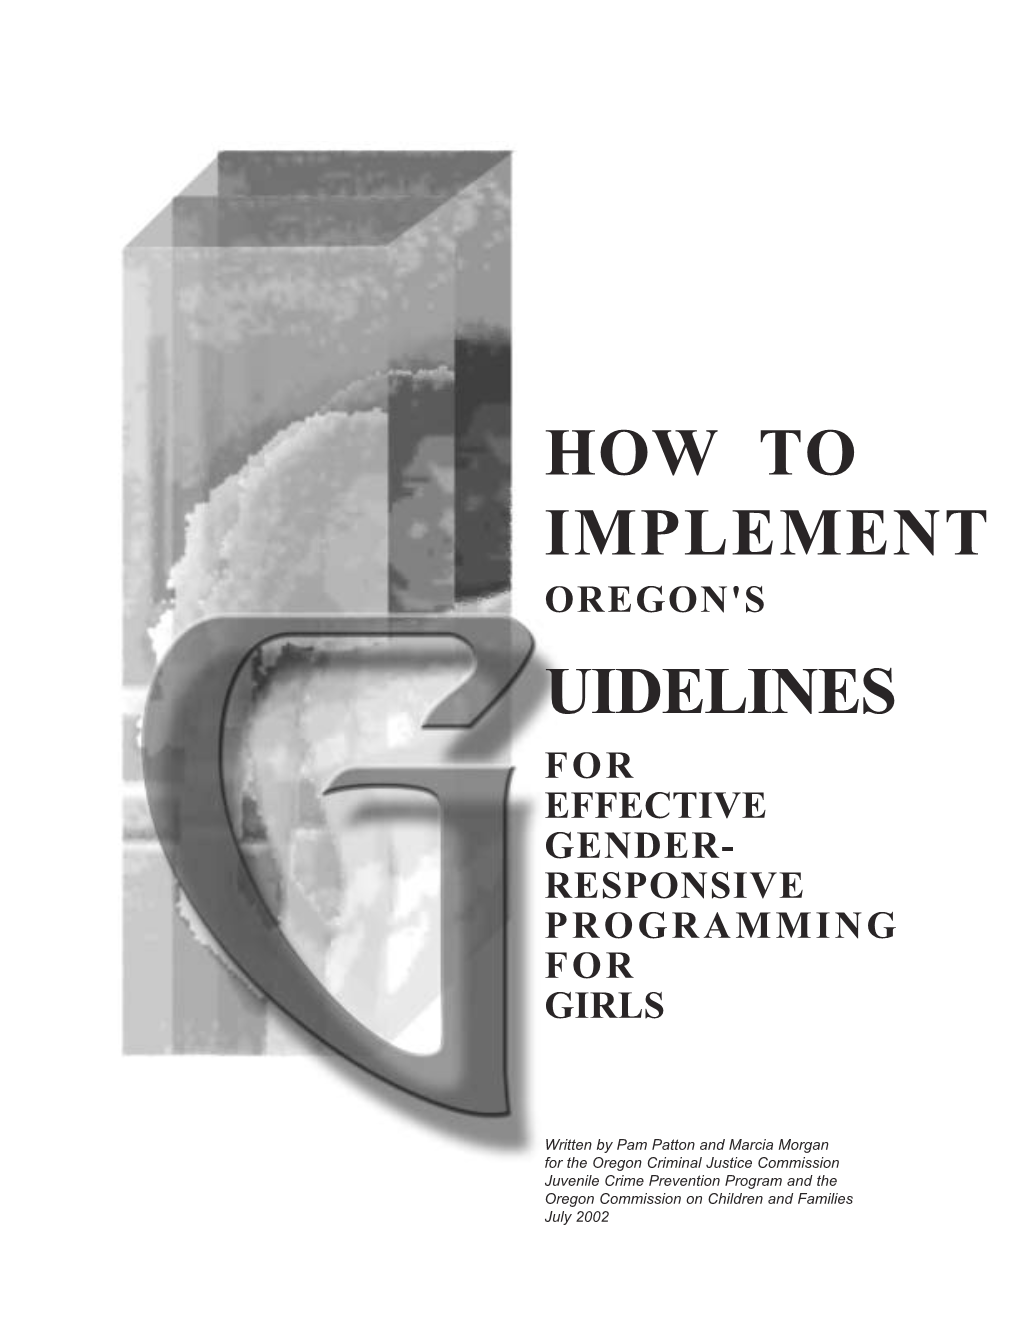 How to Implement Guidelines for Effective Gender-Responsive